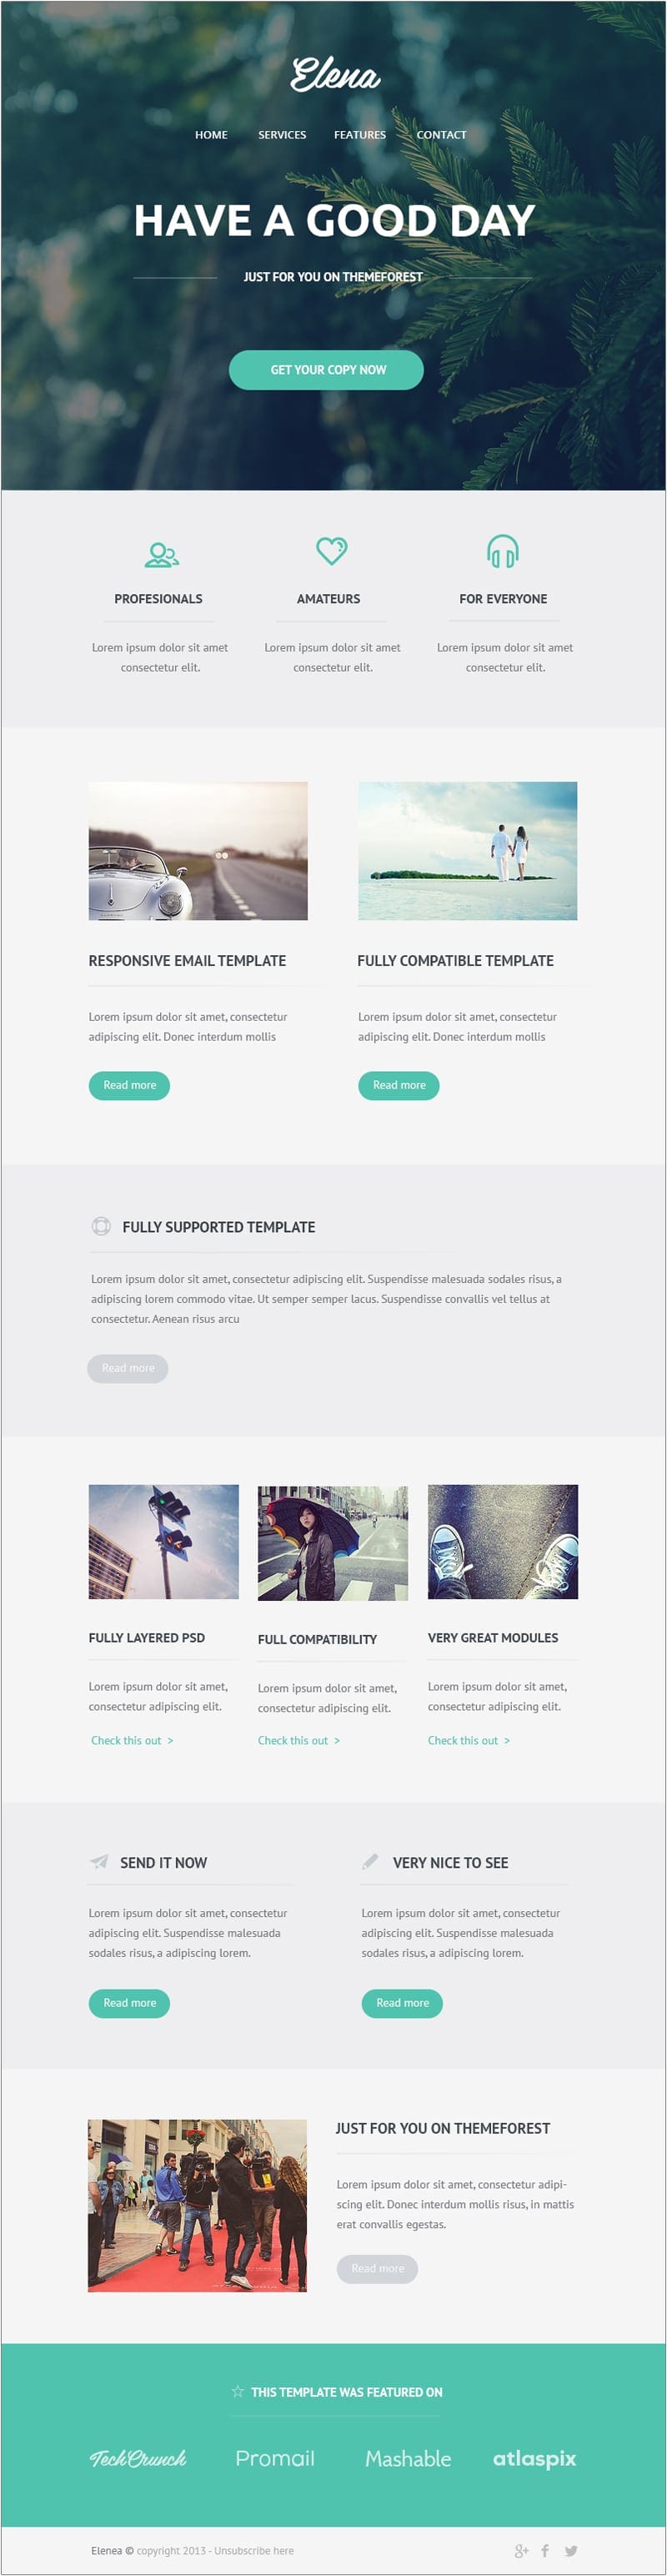 This free psd is for the Elena email design.This free web design ...